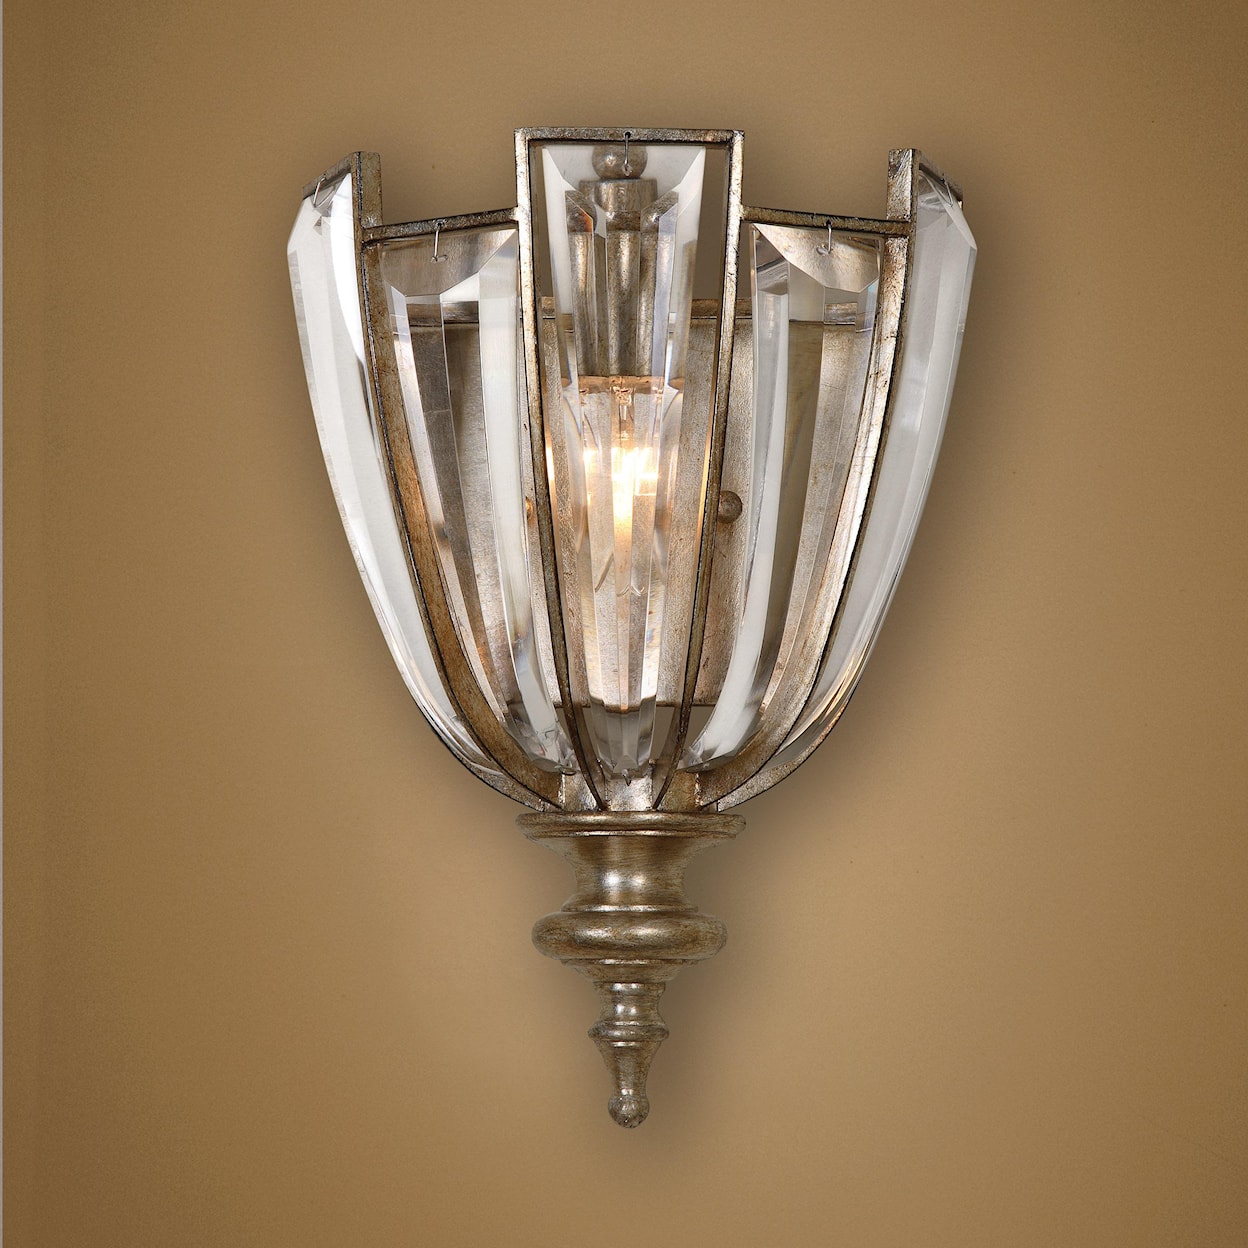 Uttermost Lighting Fixtures - Wall Sconces Uttermost Vicentina 1 Light Crystal Wall Sco